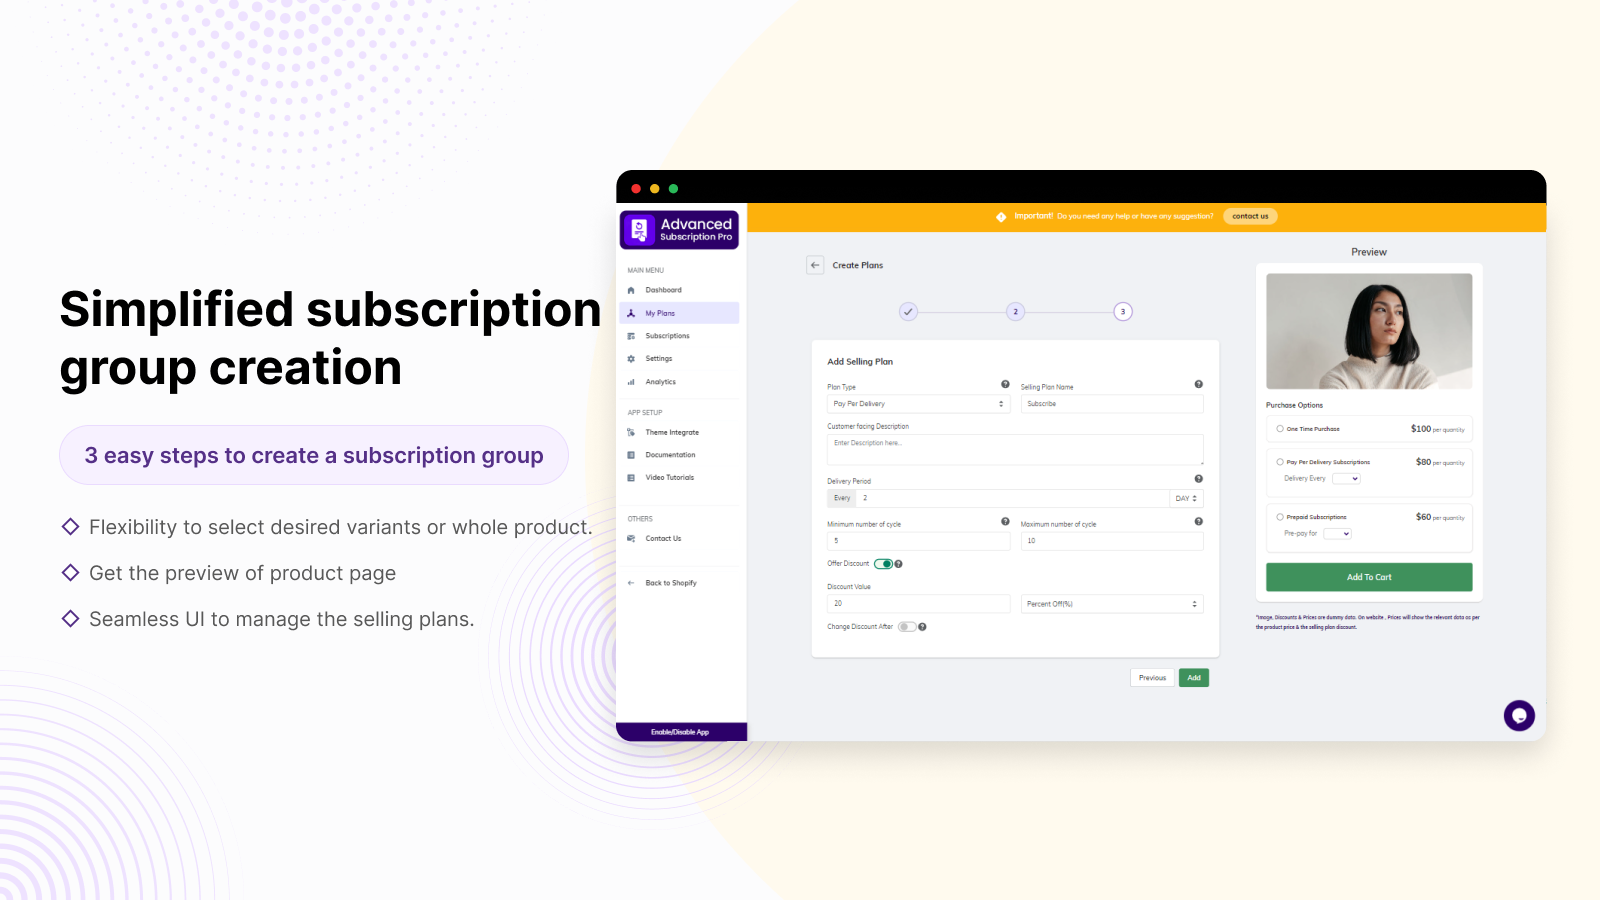 Simplified subscription group creation in easy steps